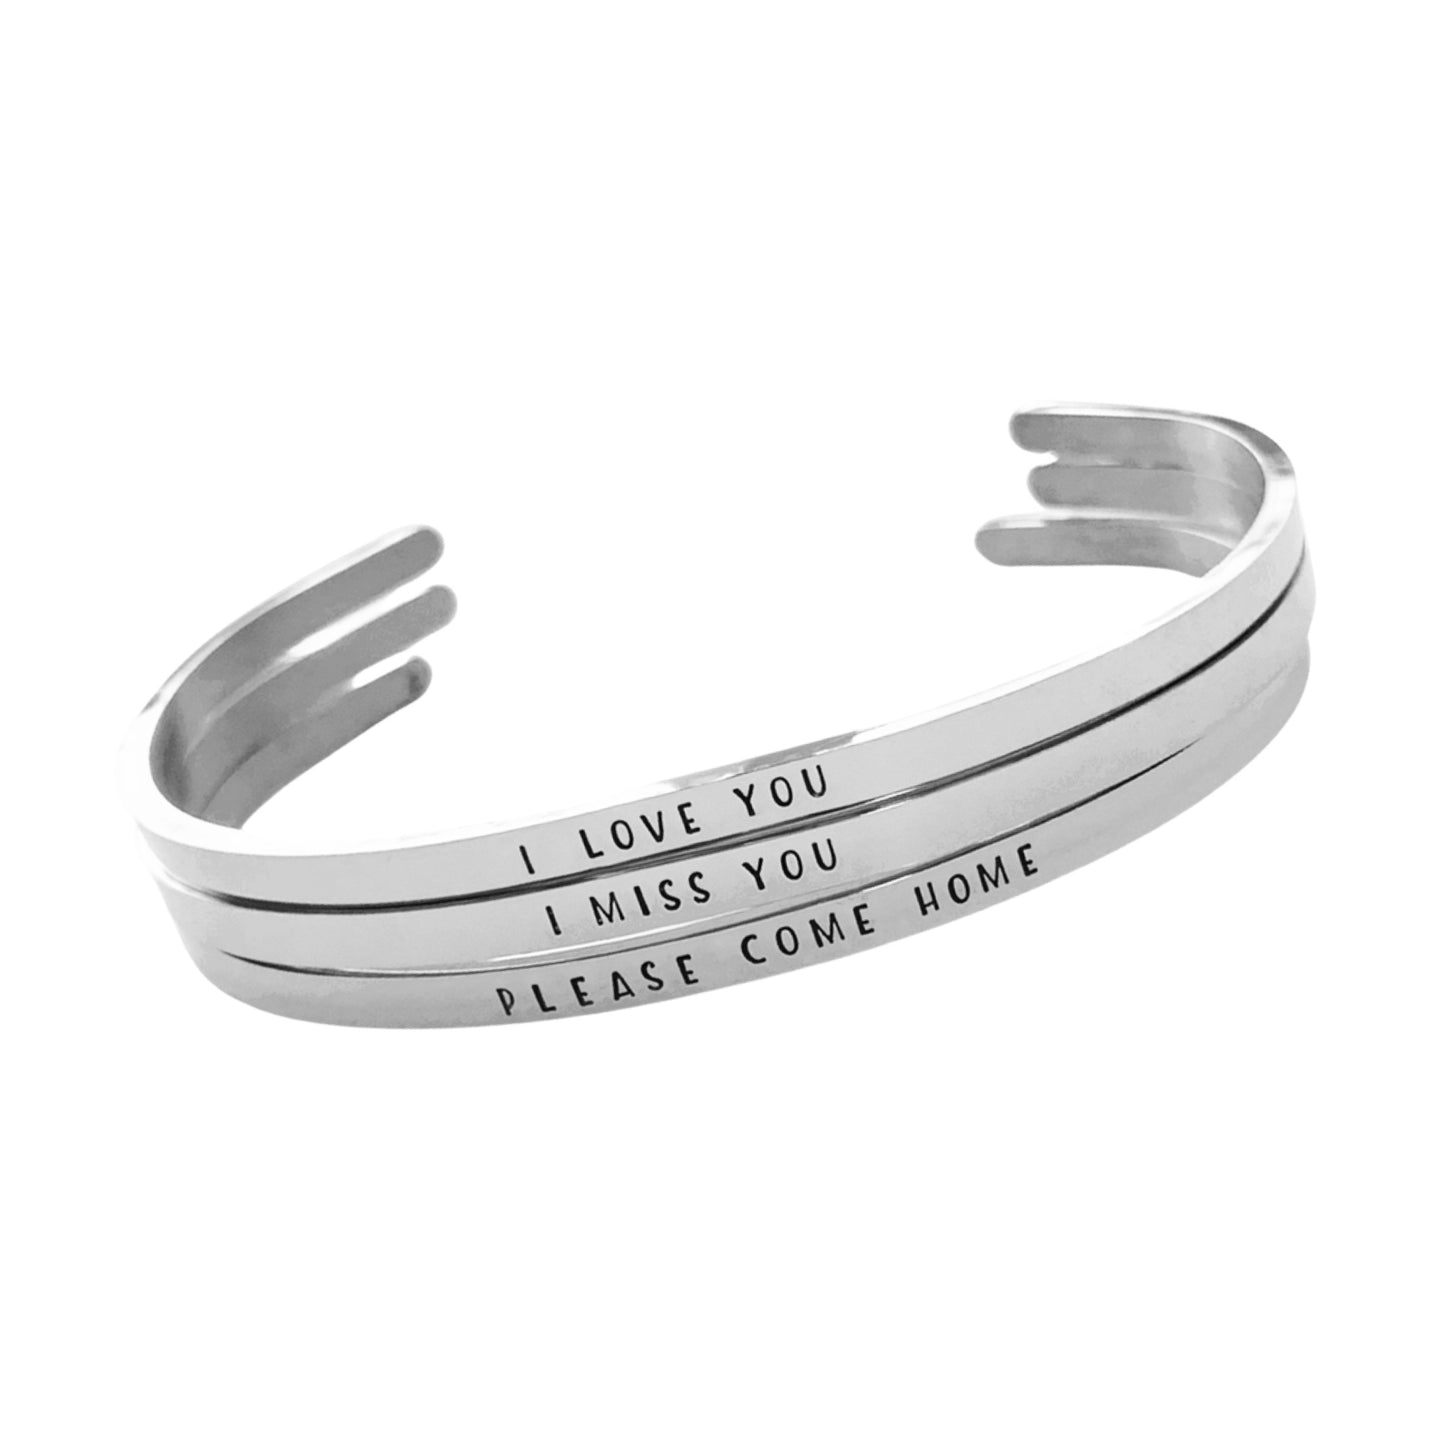 I love you | I miss you | Please come home (BB Easton) - Stackable Cuff Bracelets